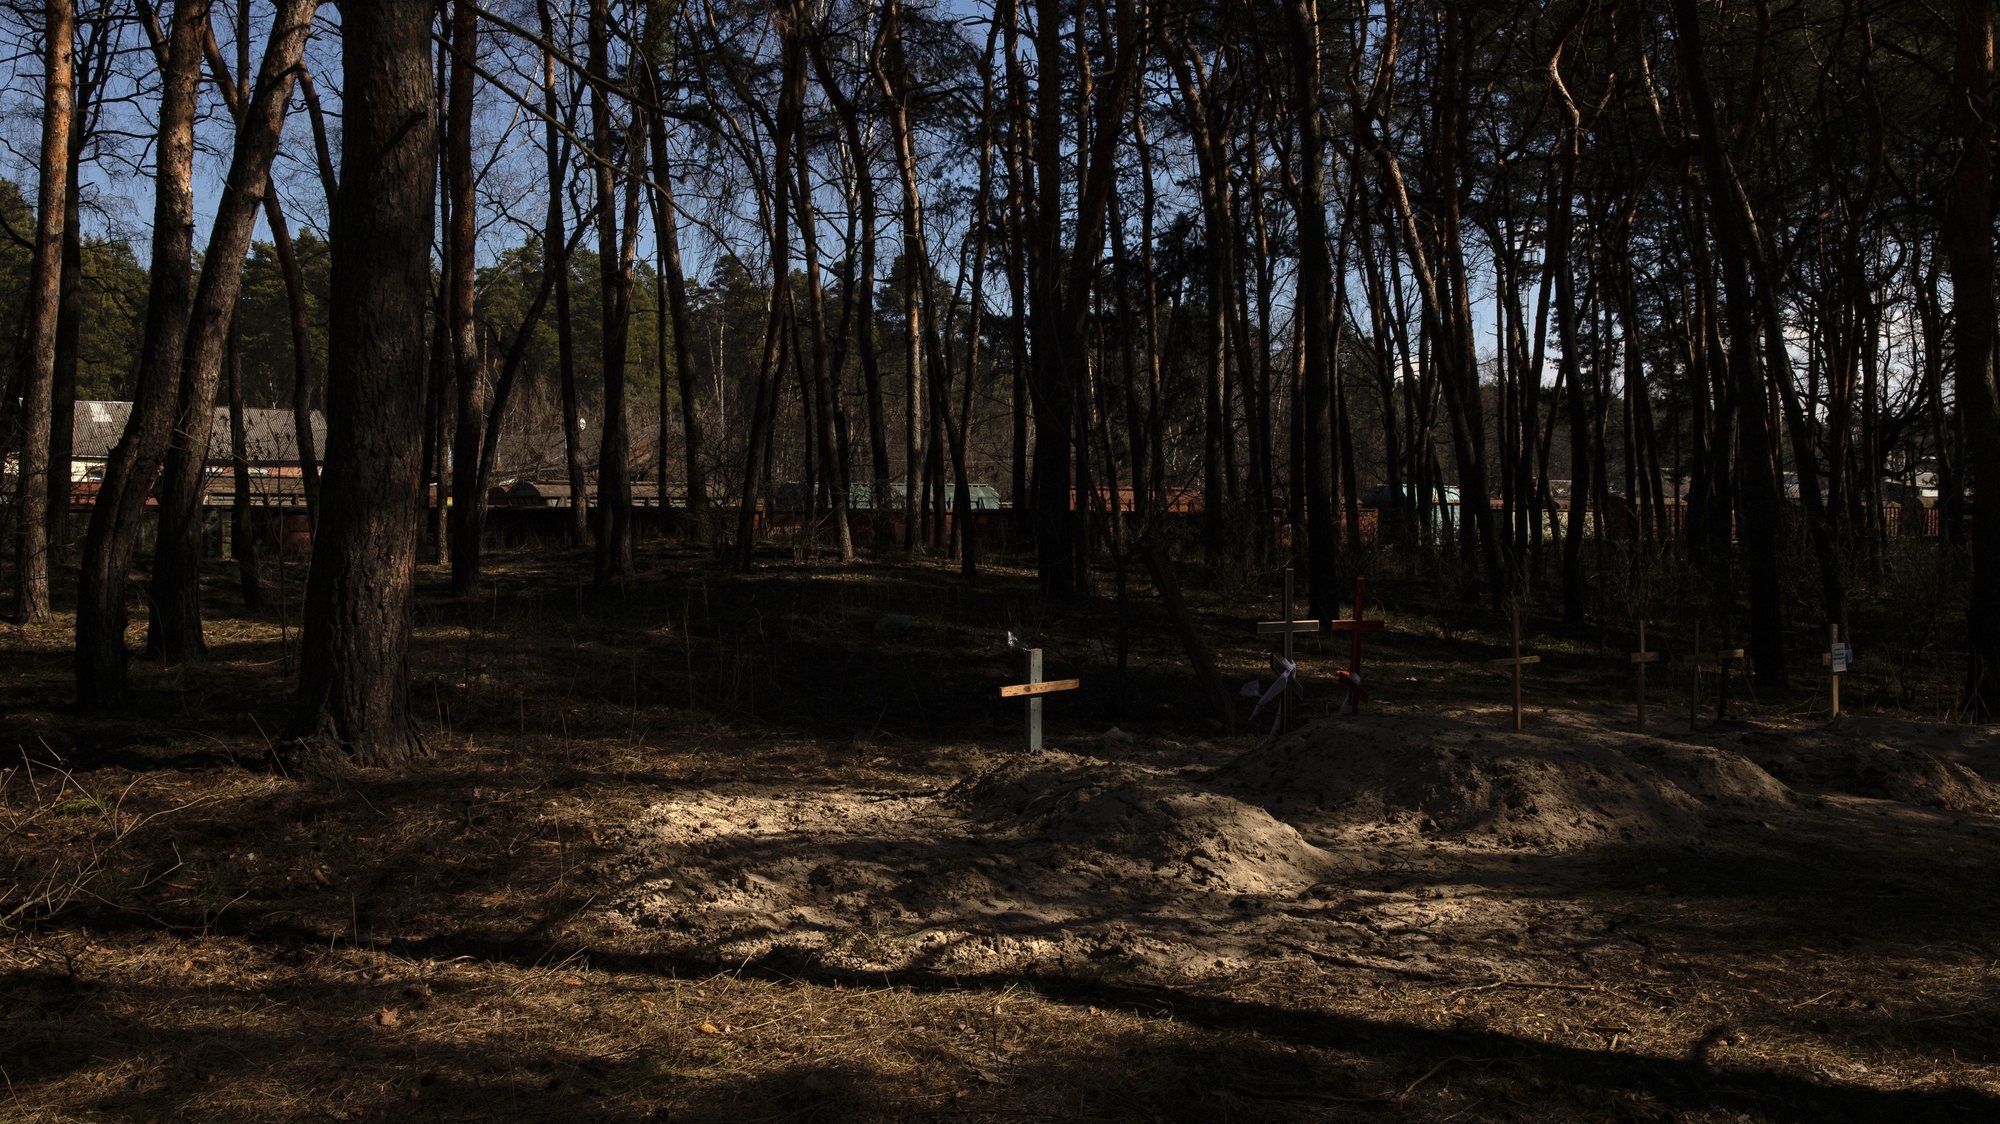 epa09860887 A handmade cross stands in the residential area on a makeshift grave for a civilian killed during the Russian invasion in Trostyanets town, Sumy region, Ukraine, 29 March 2022 (issued 30 March 2022). Trostyanets was recaptured by the Ukrainian army after the town was under the control of Russian forces for over a month following the invasion on 24 February. The local residents claim that Russian soldiers were not letting bury the dead people, forcing many to leave their homes to move into those houses, and were looting in the town. Locals were saying that some of the town&#039;s residents were killed by Russian soldiers. When the Russian army was withdrawing from Trostyanets they stole many cars from local people, as well as different electronic devices.